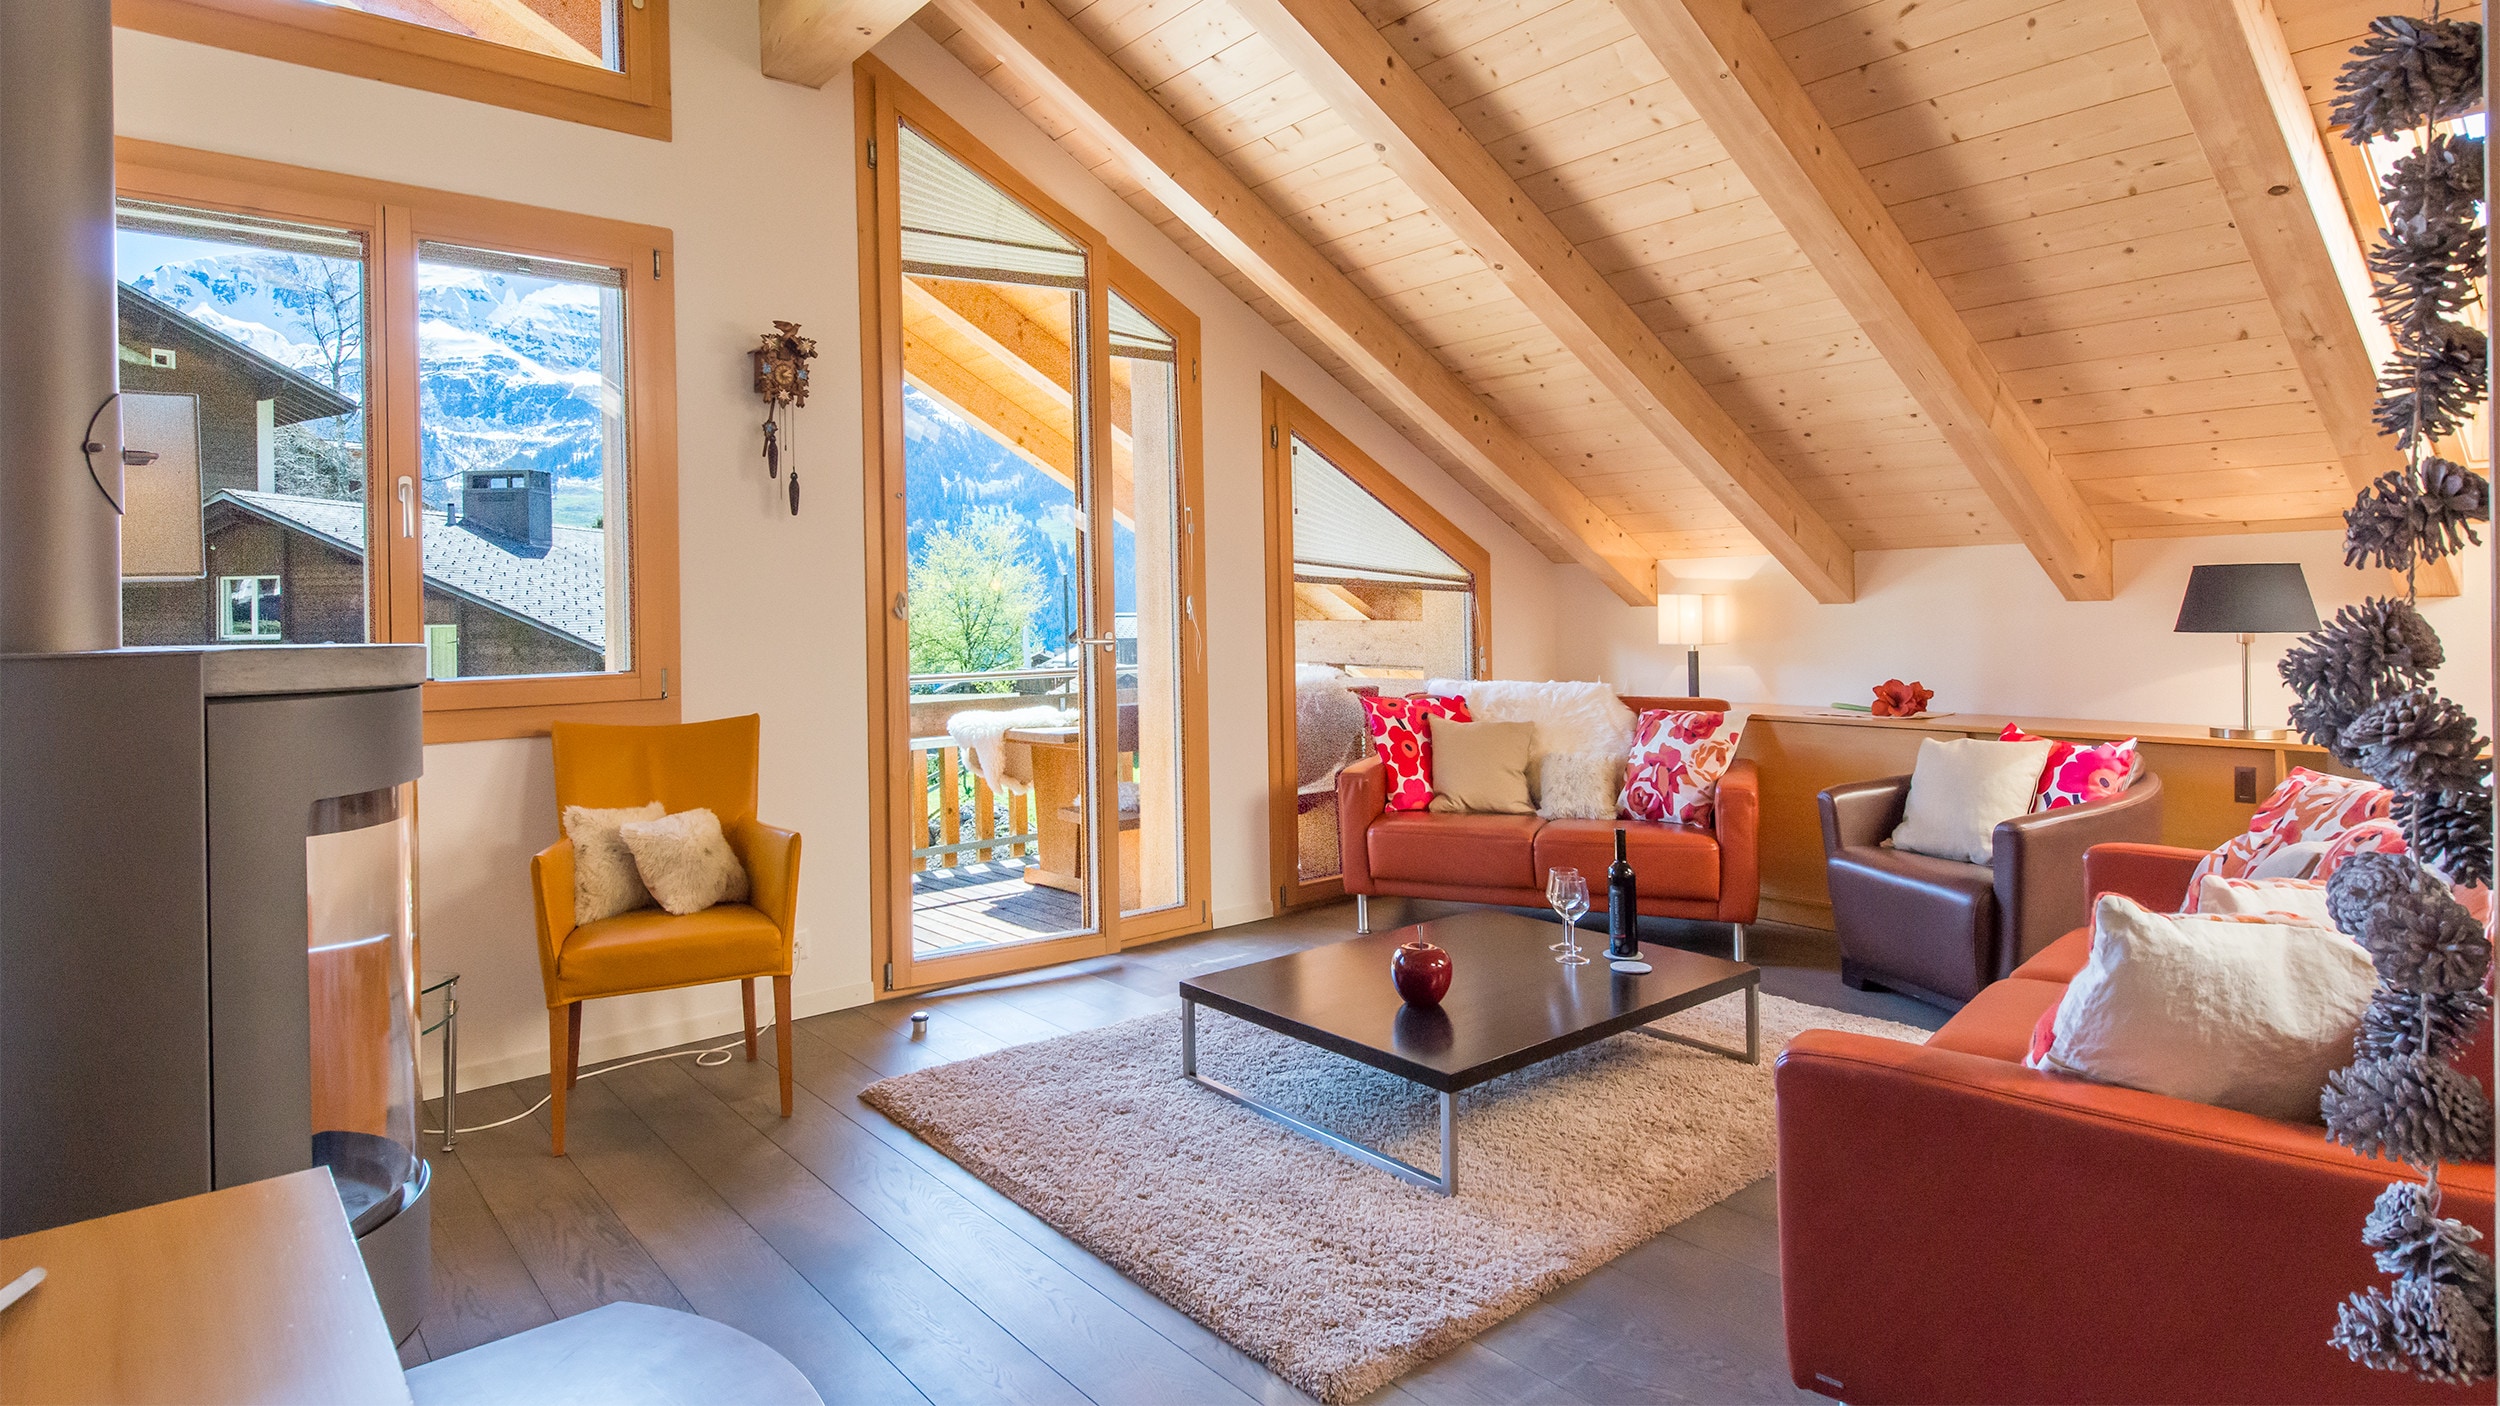 Wengen Chalet Luna offers this penthouse apartment by Alpine Holiday Services.